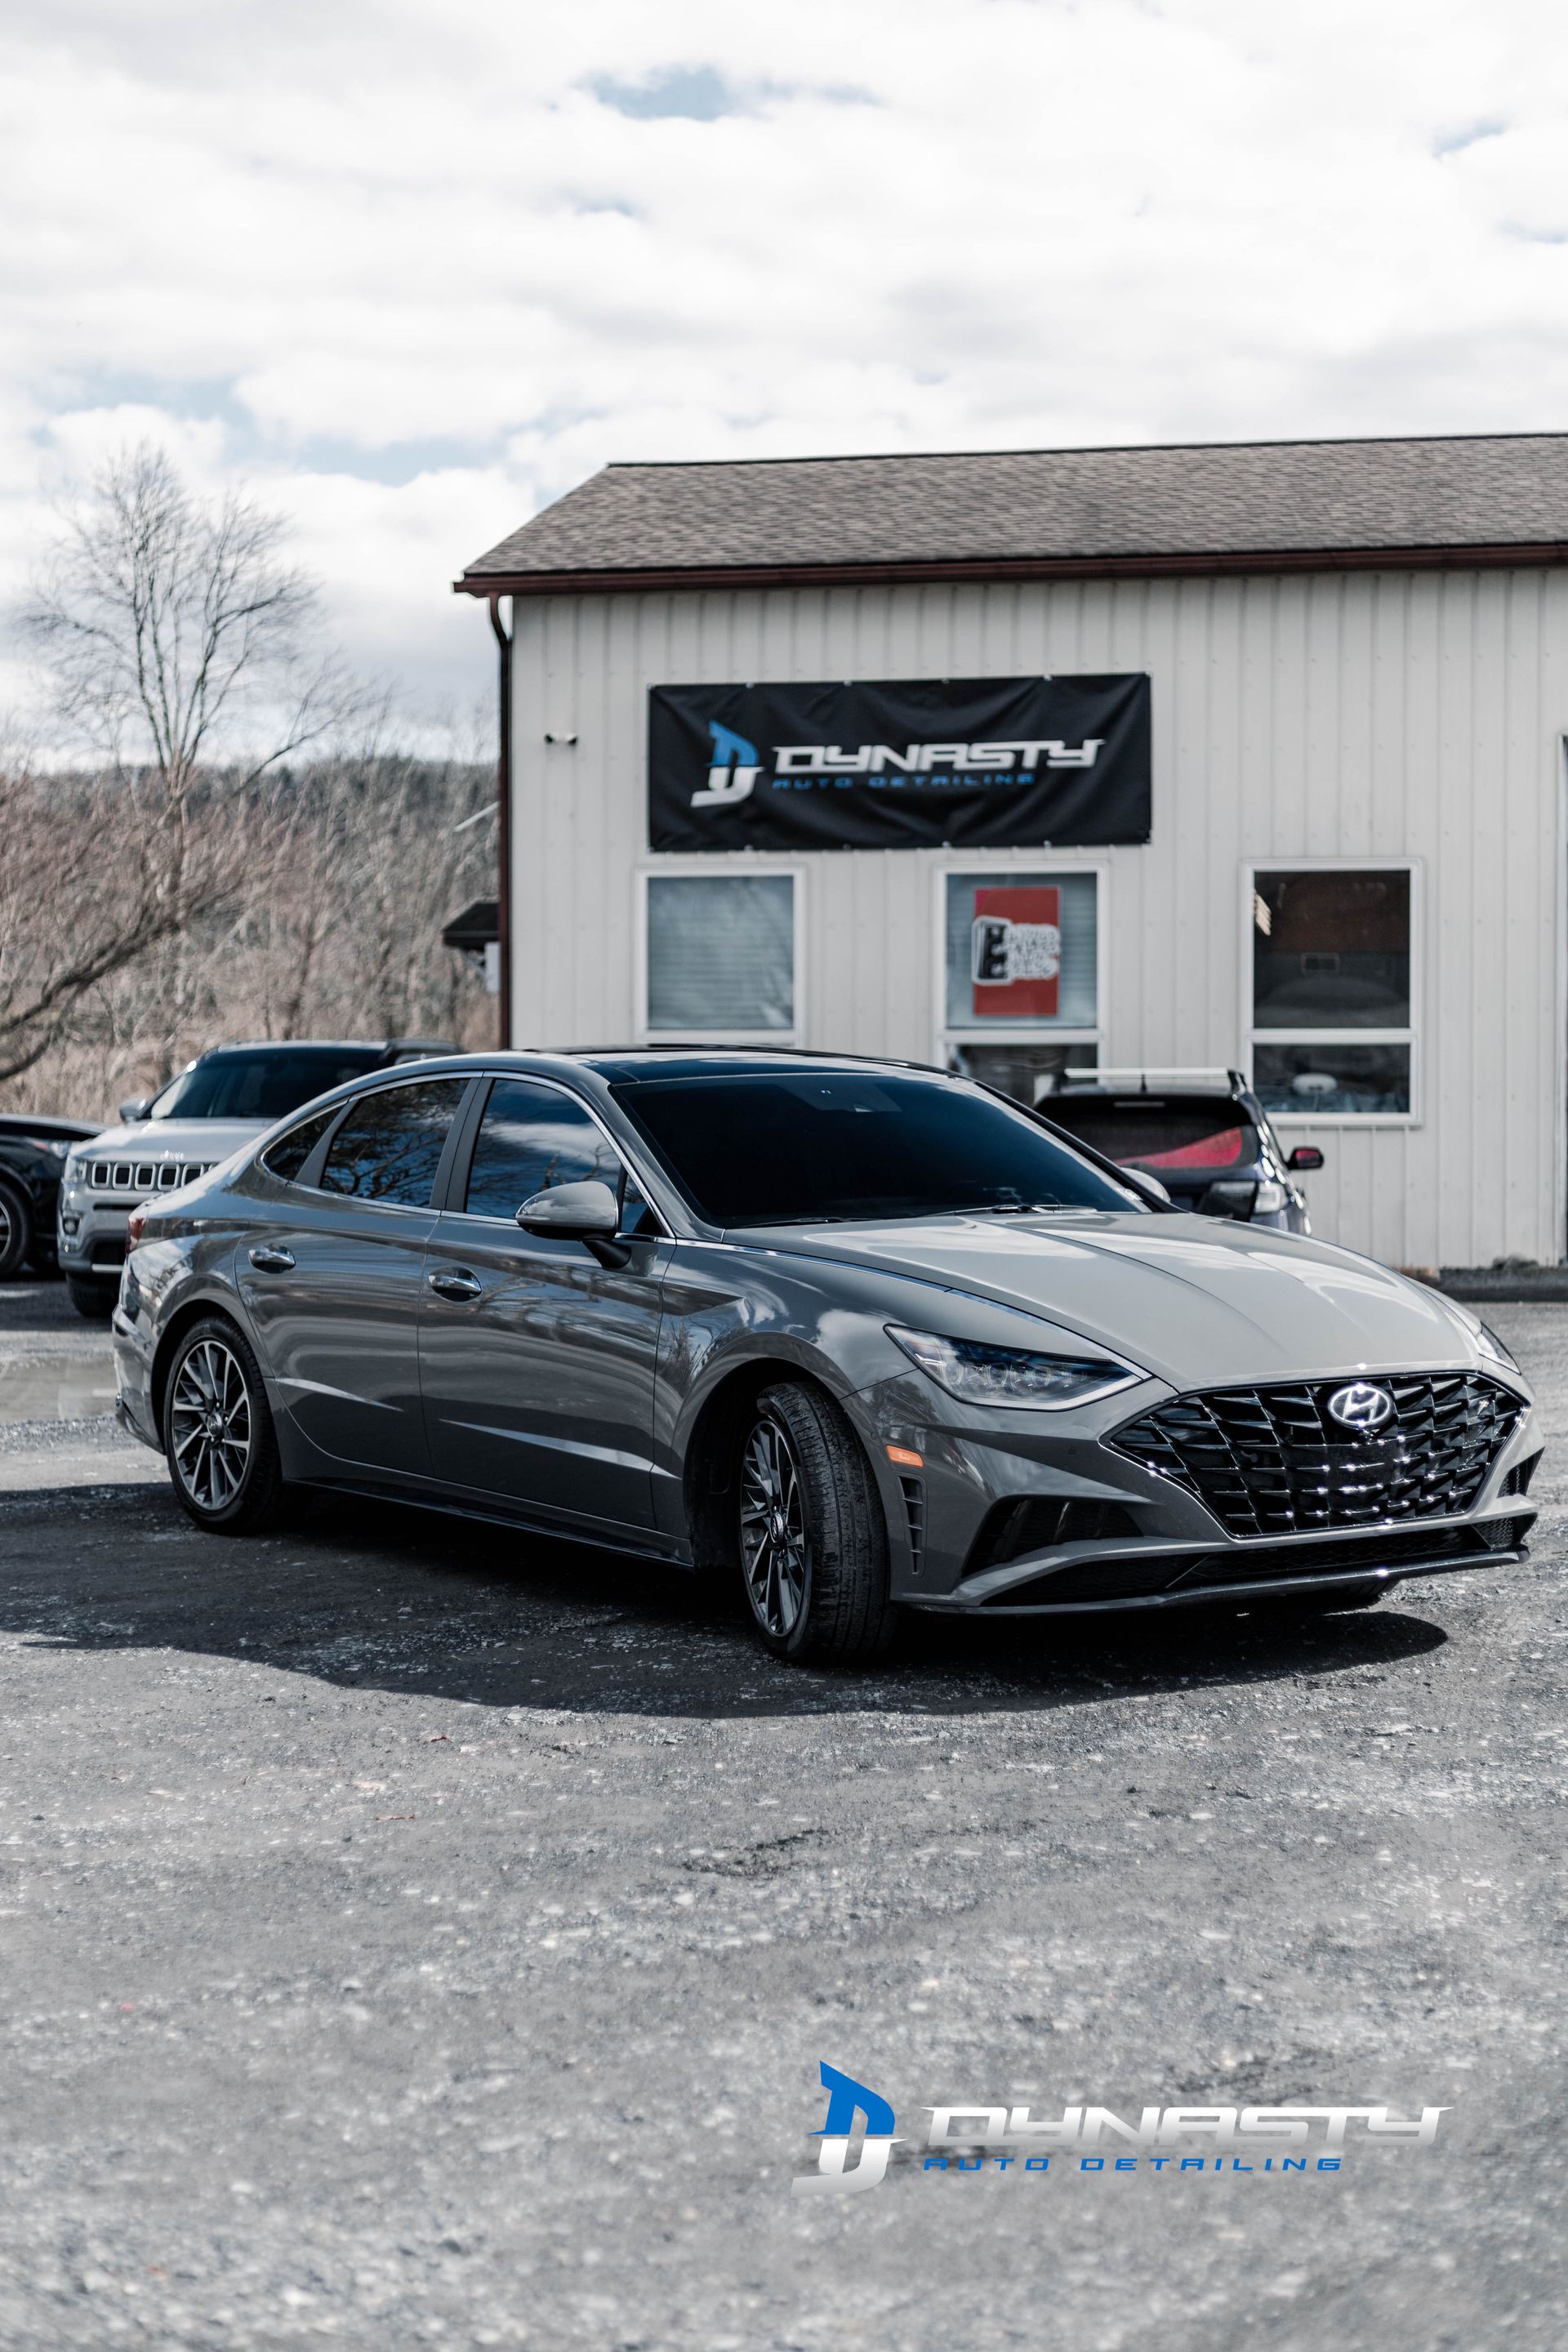 Ceramic Coating - A gray Hyundai Sonata is parked in front of a building.